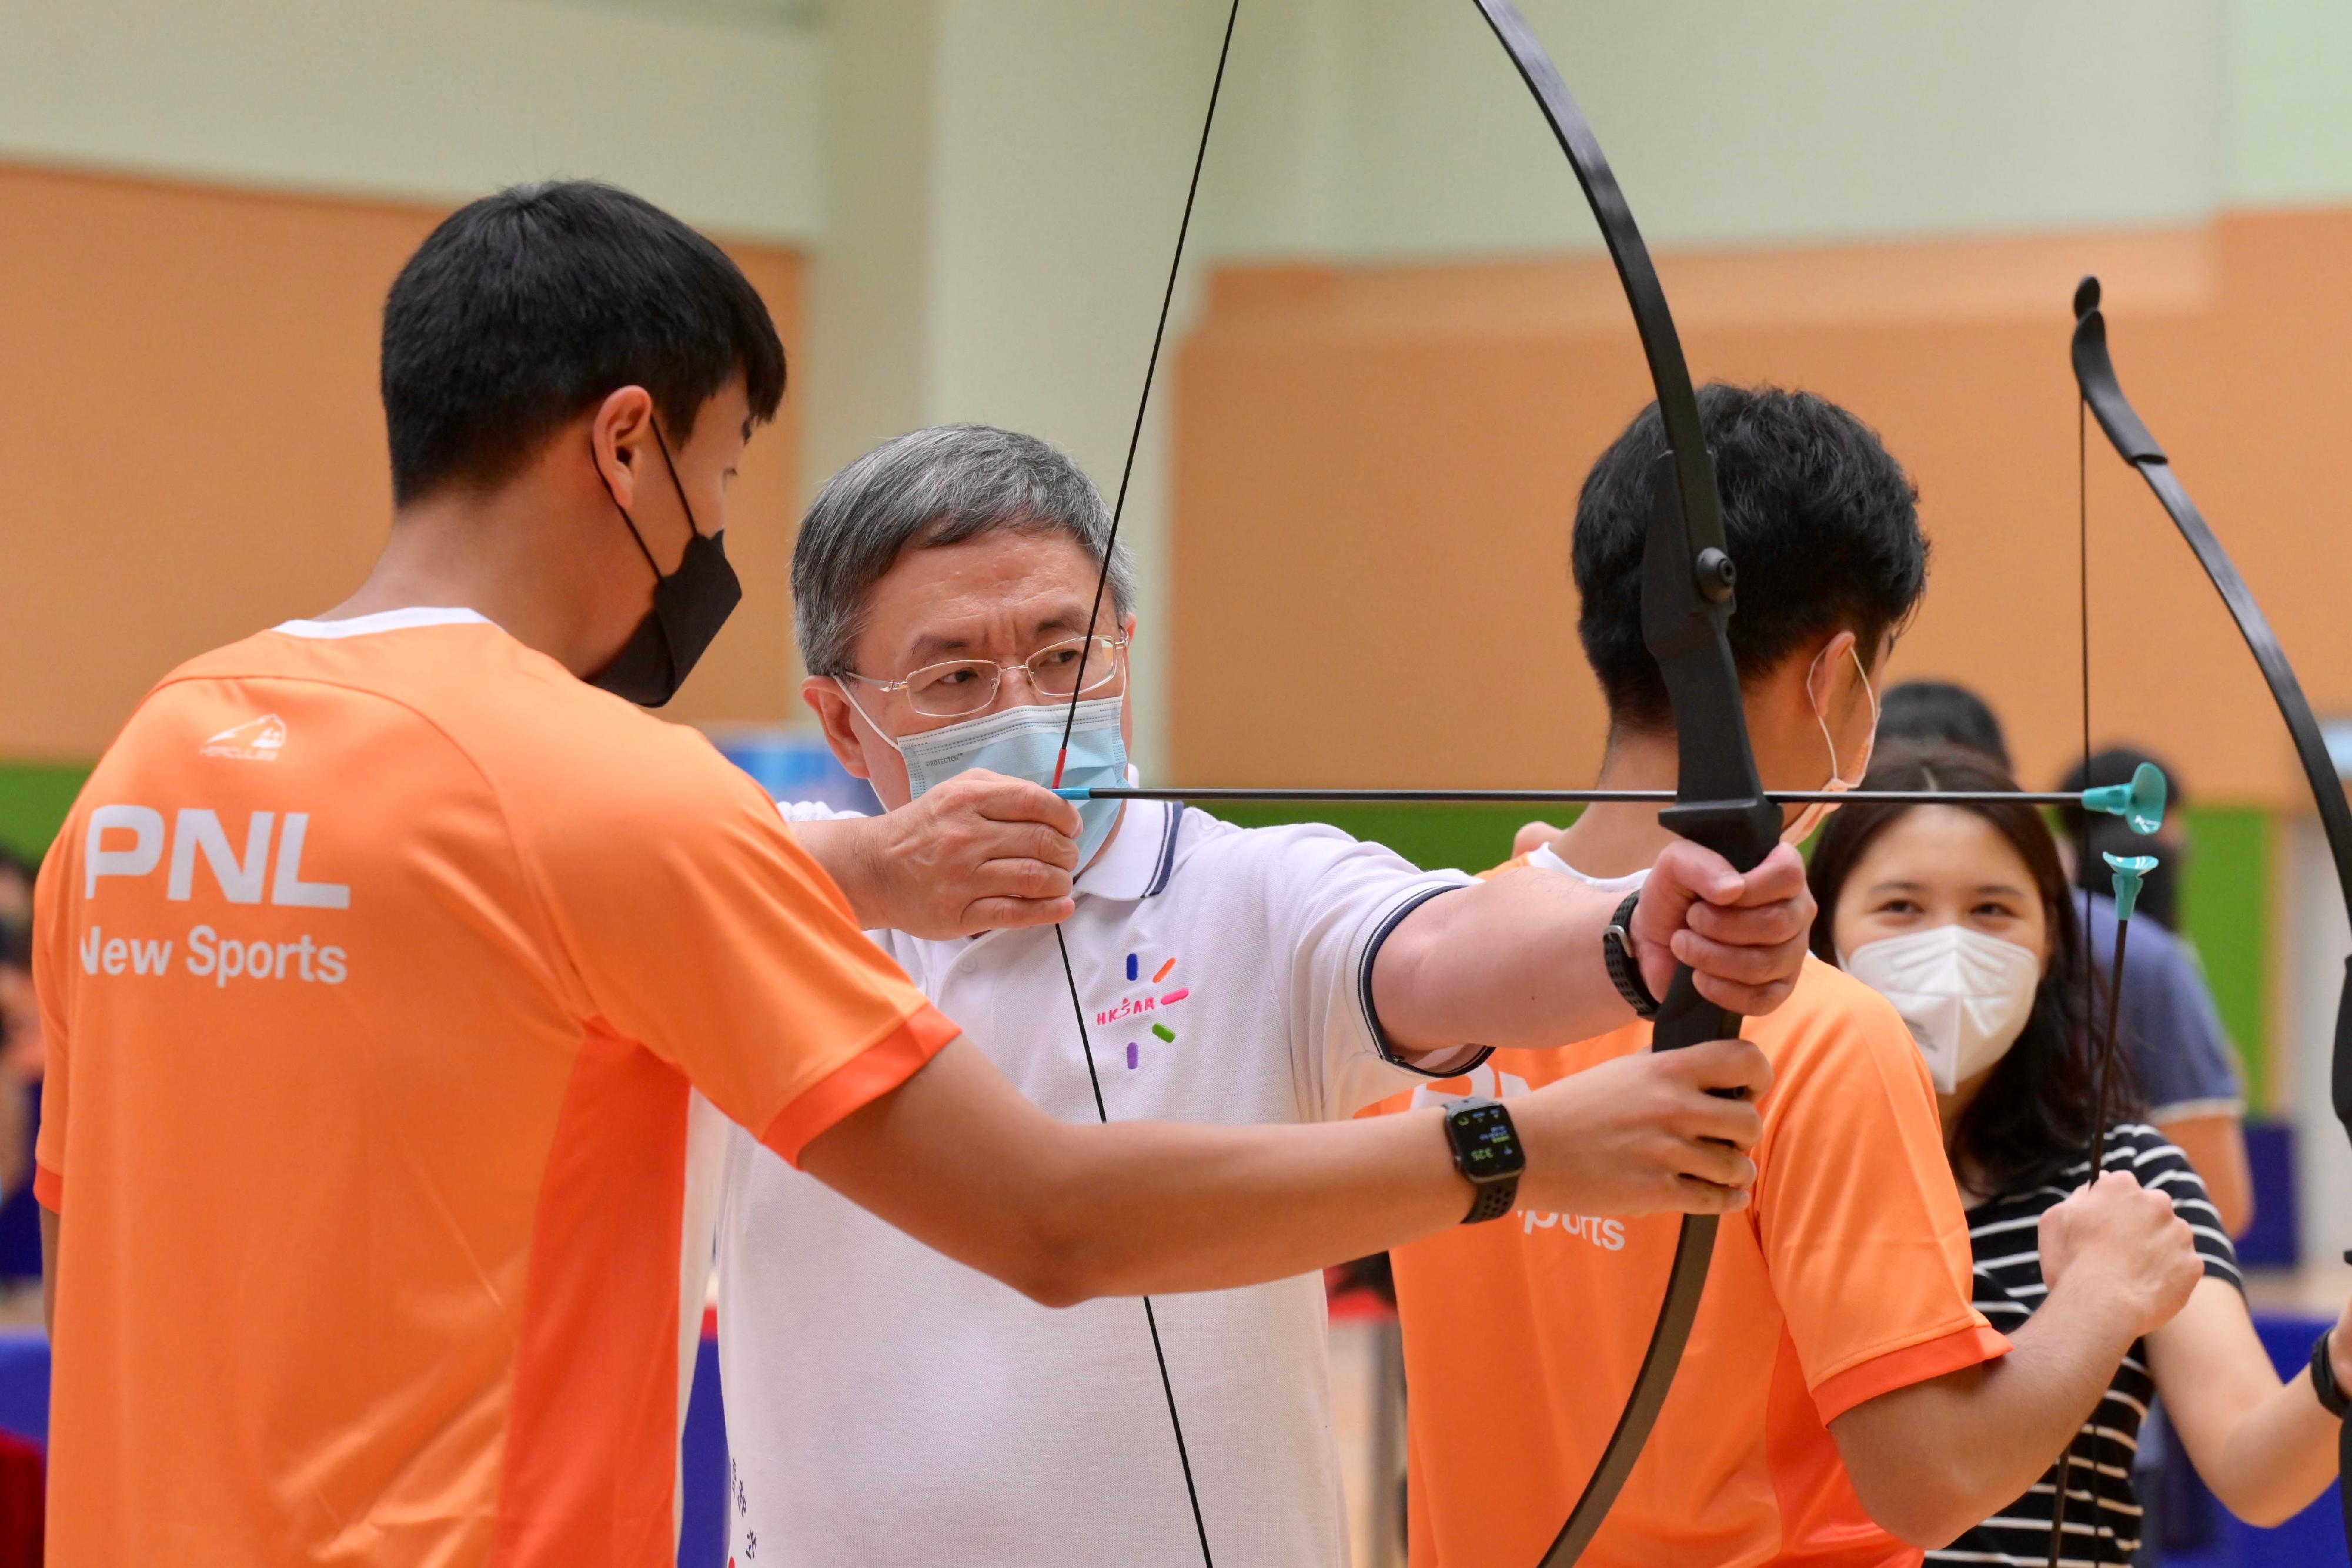 The Deputy Chief Secretary for Administration, Mr Cheuk Wing-hing (second left), joins the public for archery play-in activities at Island East Sports Centre today (August 7) as part of Sport for All Day 2022 to drive home the message of stay active, healthy and happy.